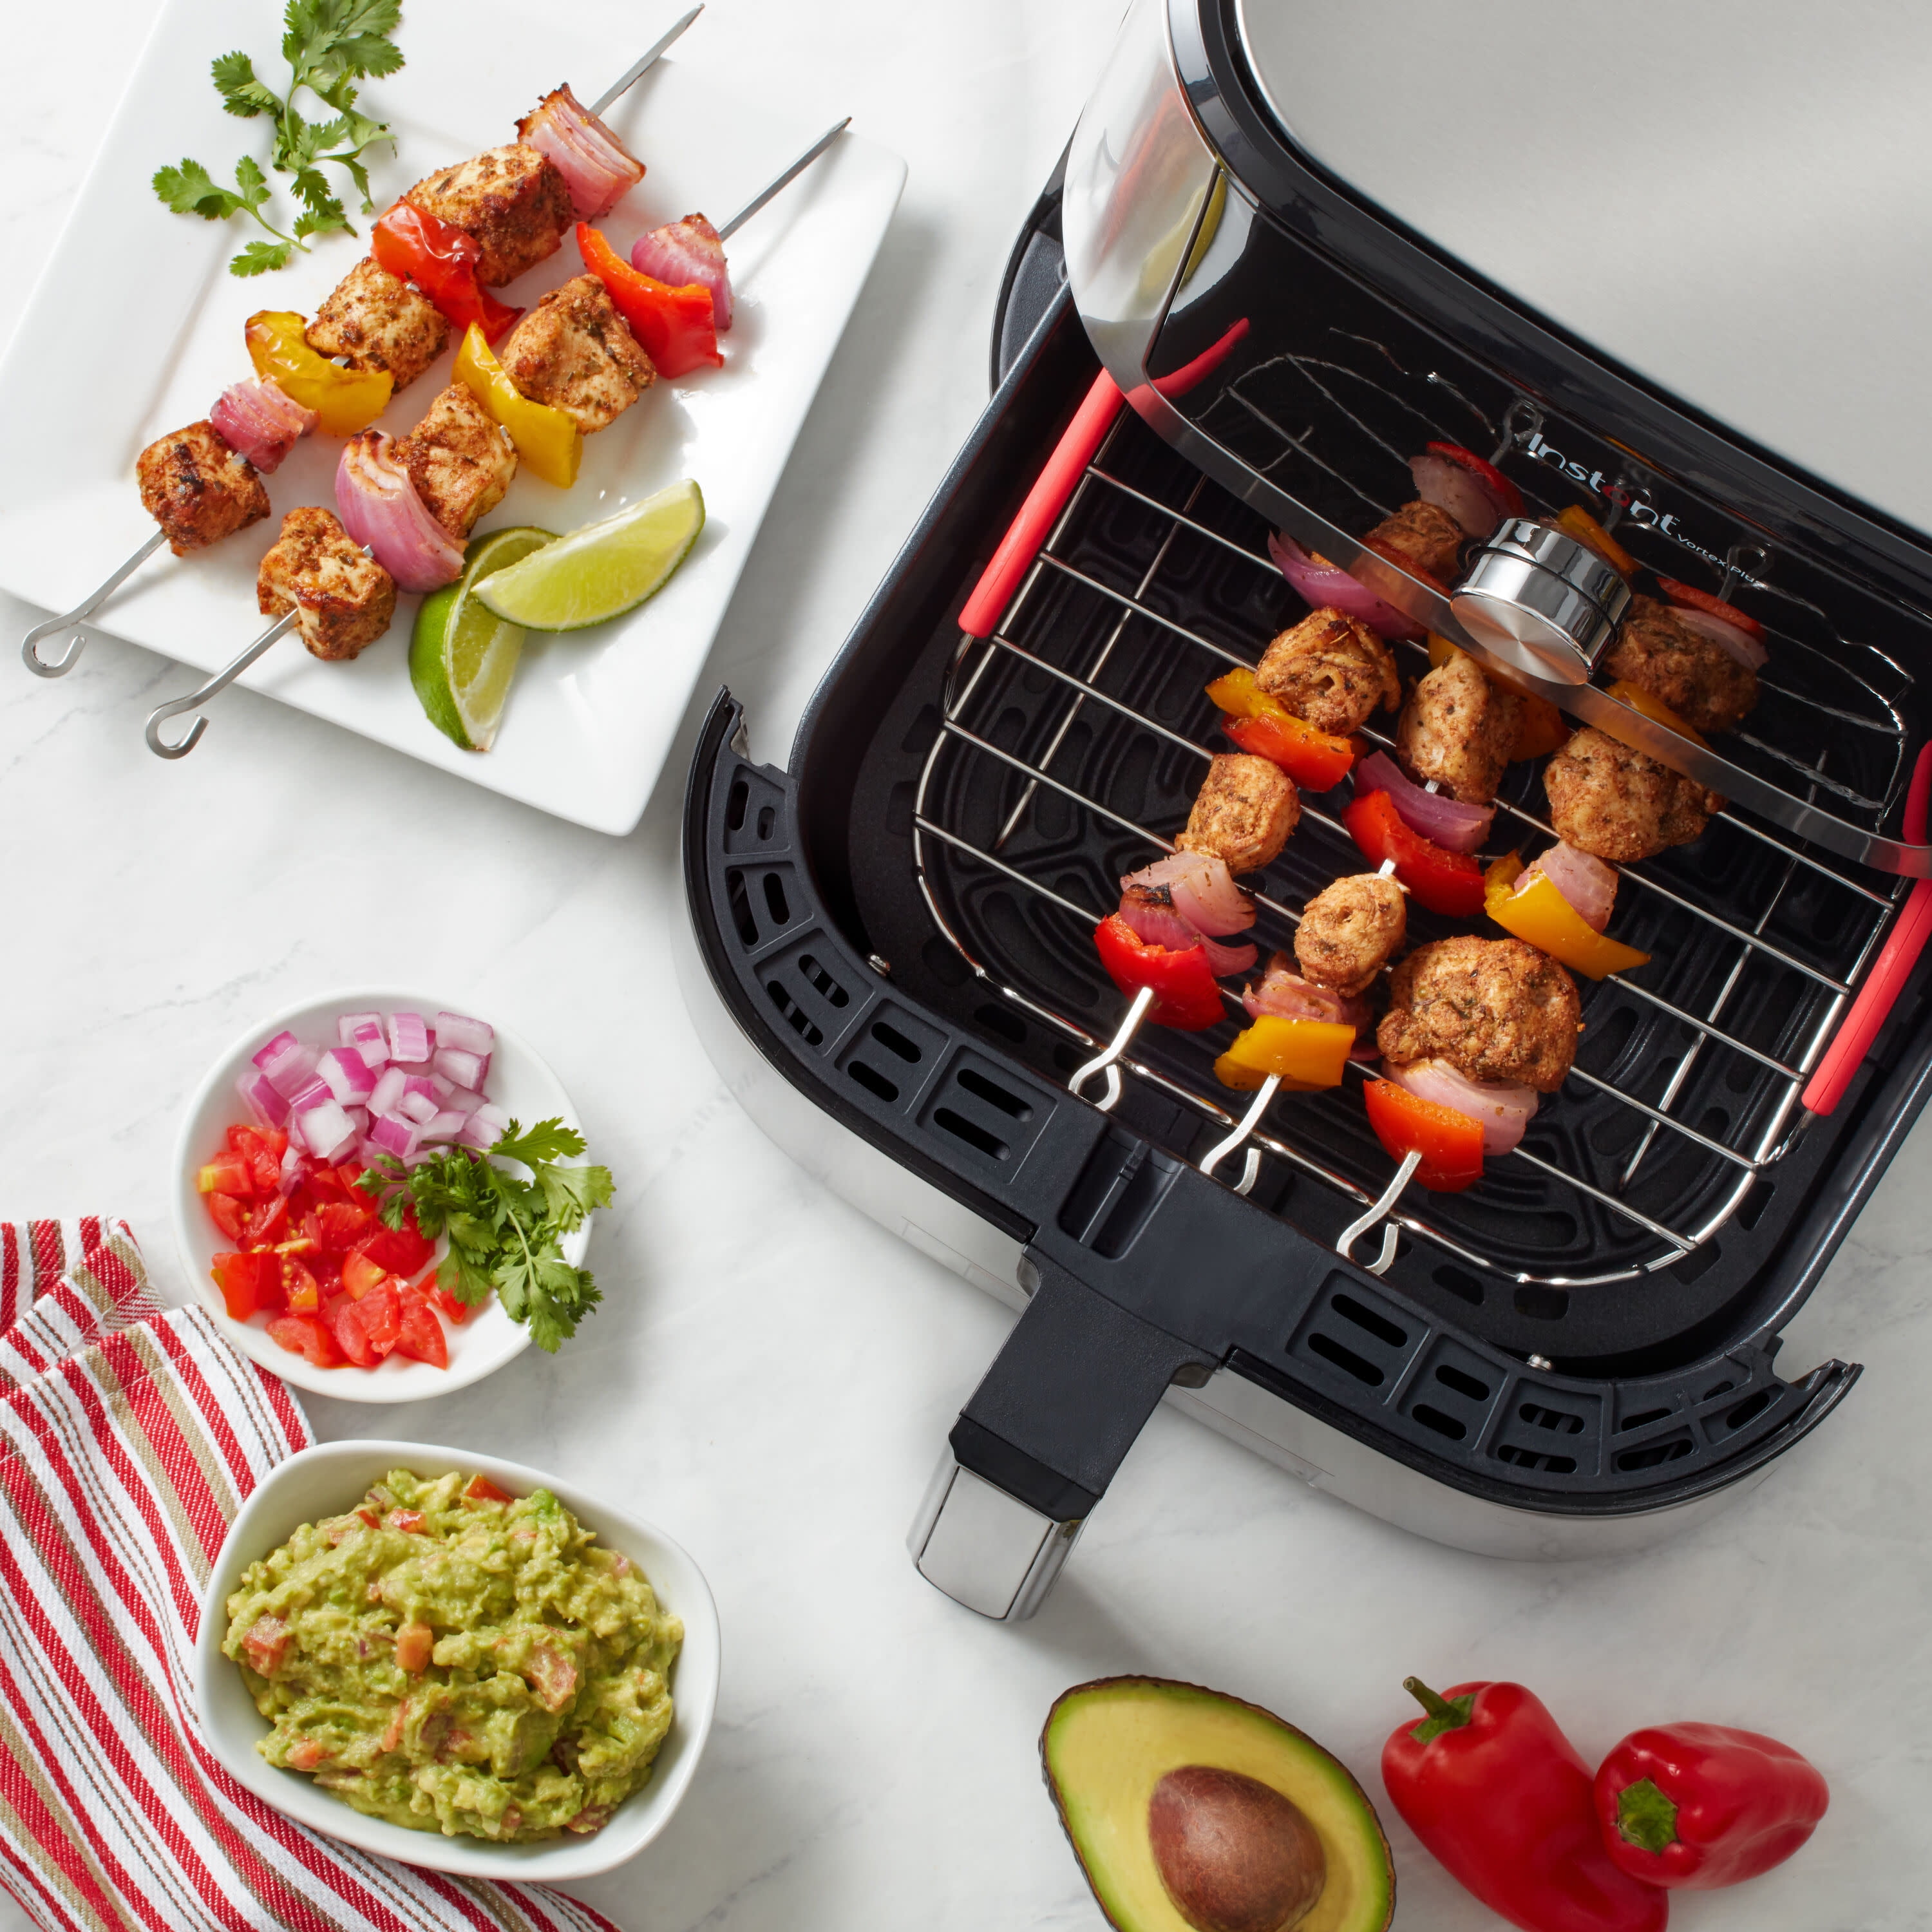 430 Stainless Steel Air Fryer Rack With 4 Roast Meat Picks, Grill